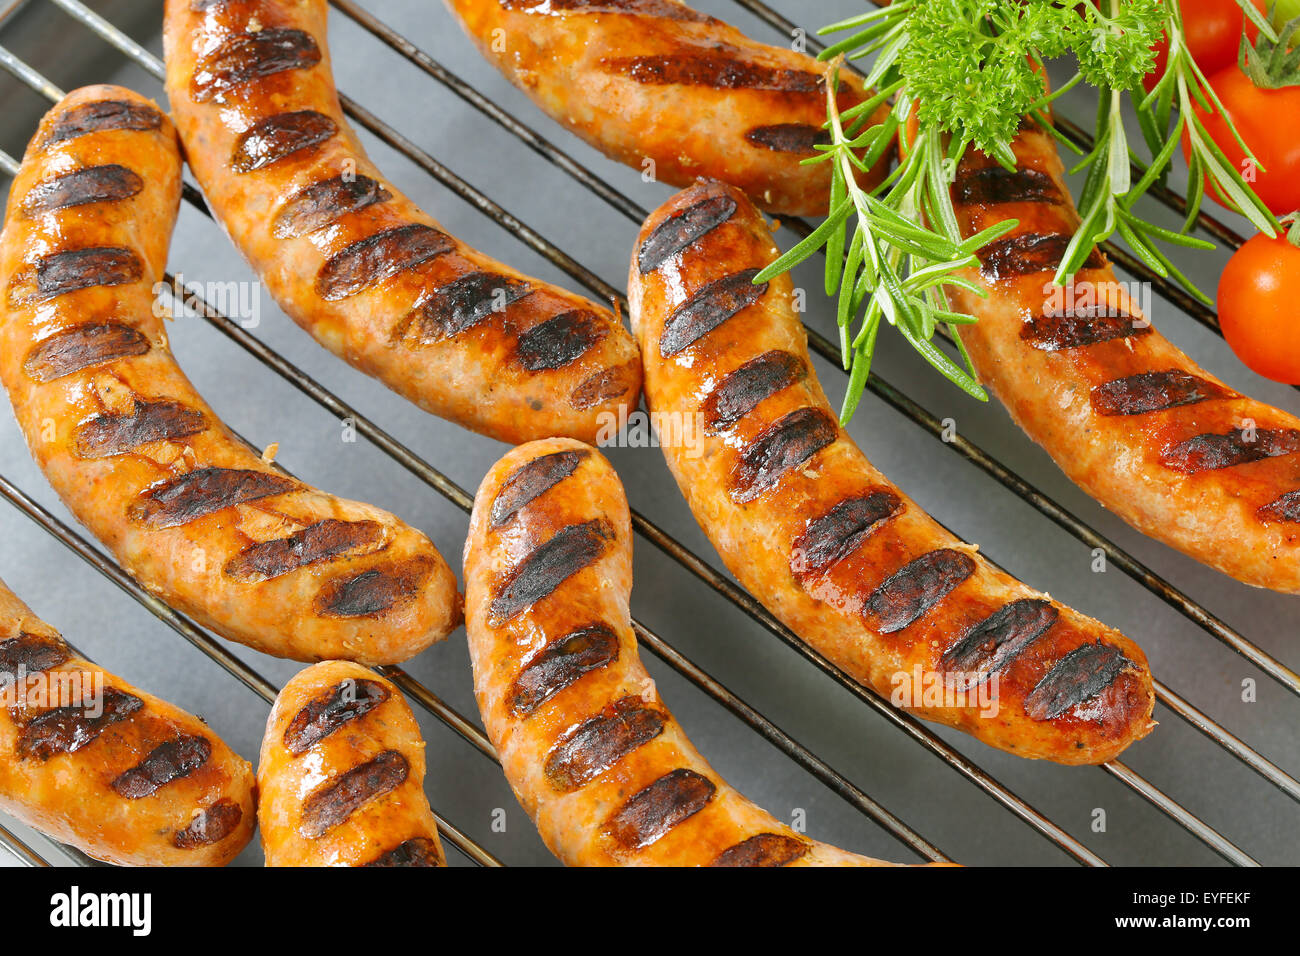 Grilled bratwursts on barbecue grid Stock Photo